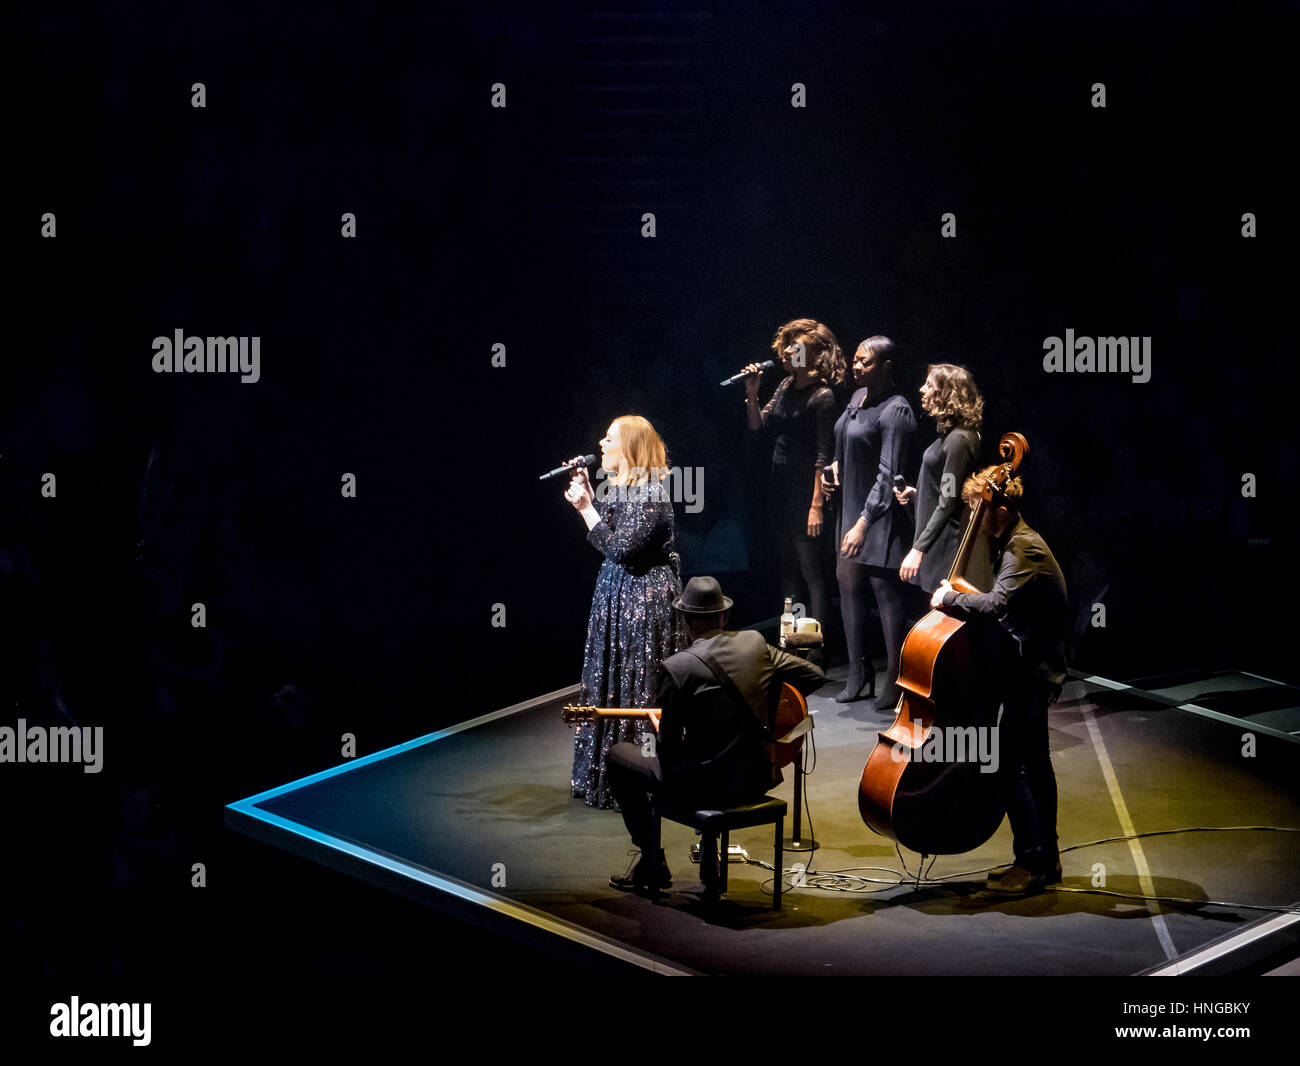 Adele in the spotlight with her band at Manchester Arena Stock Photo